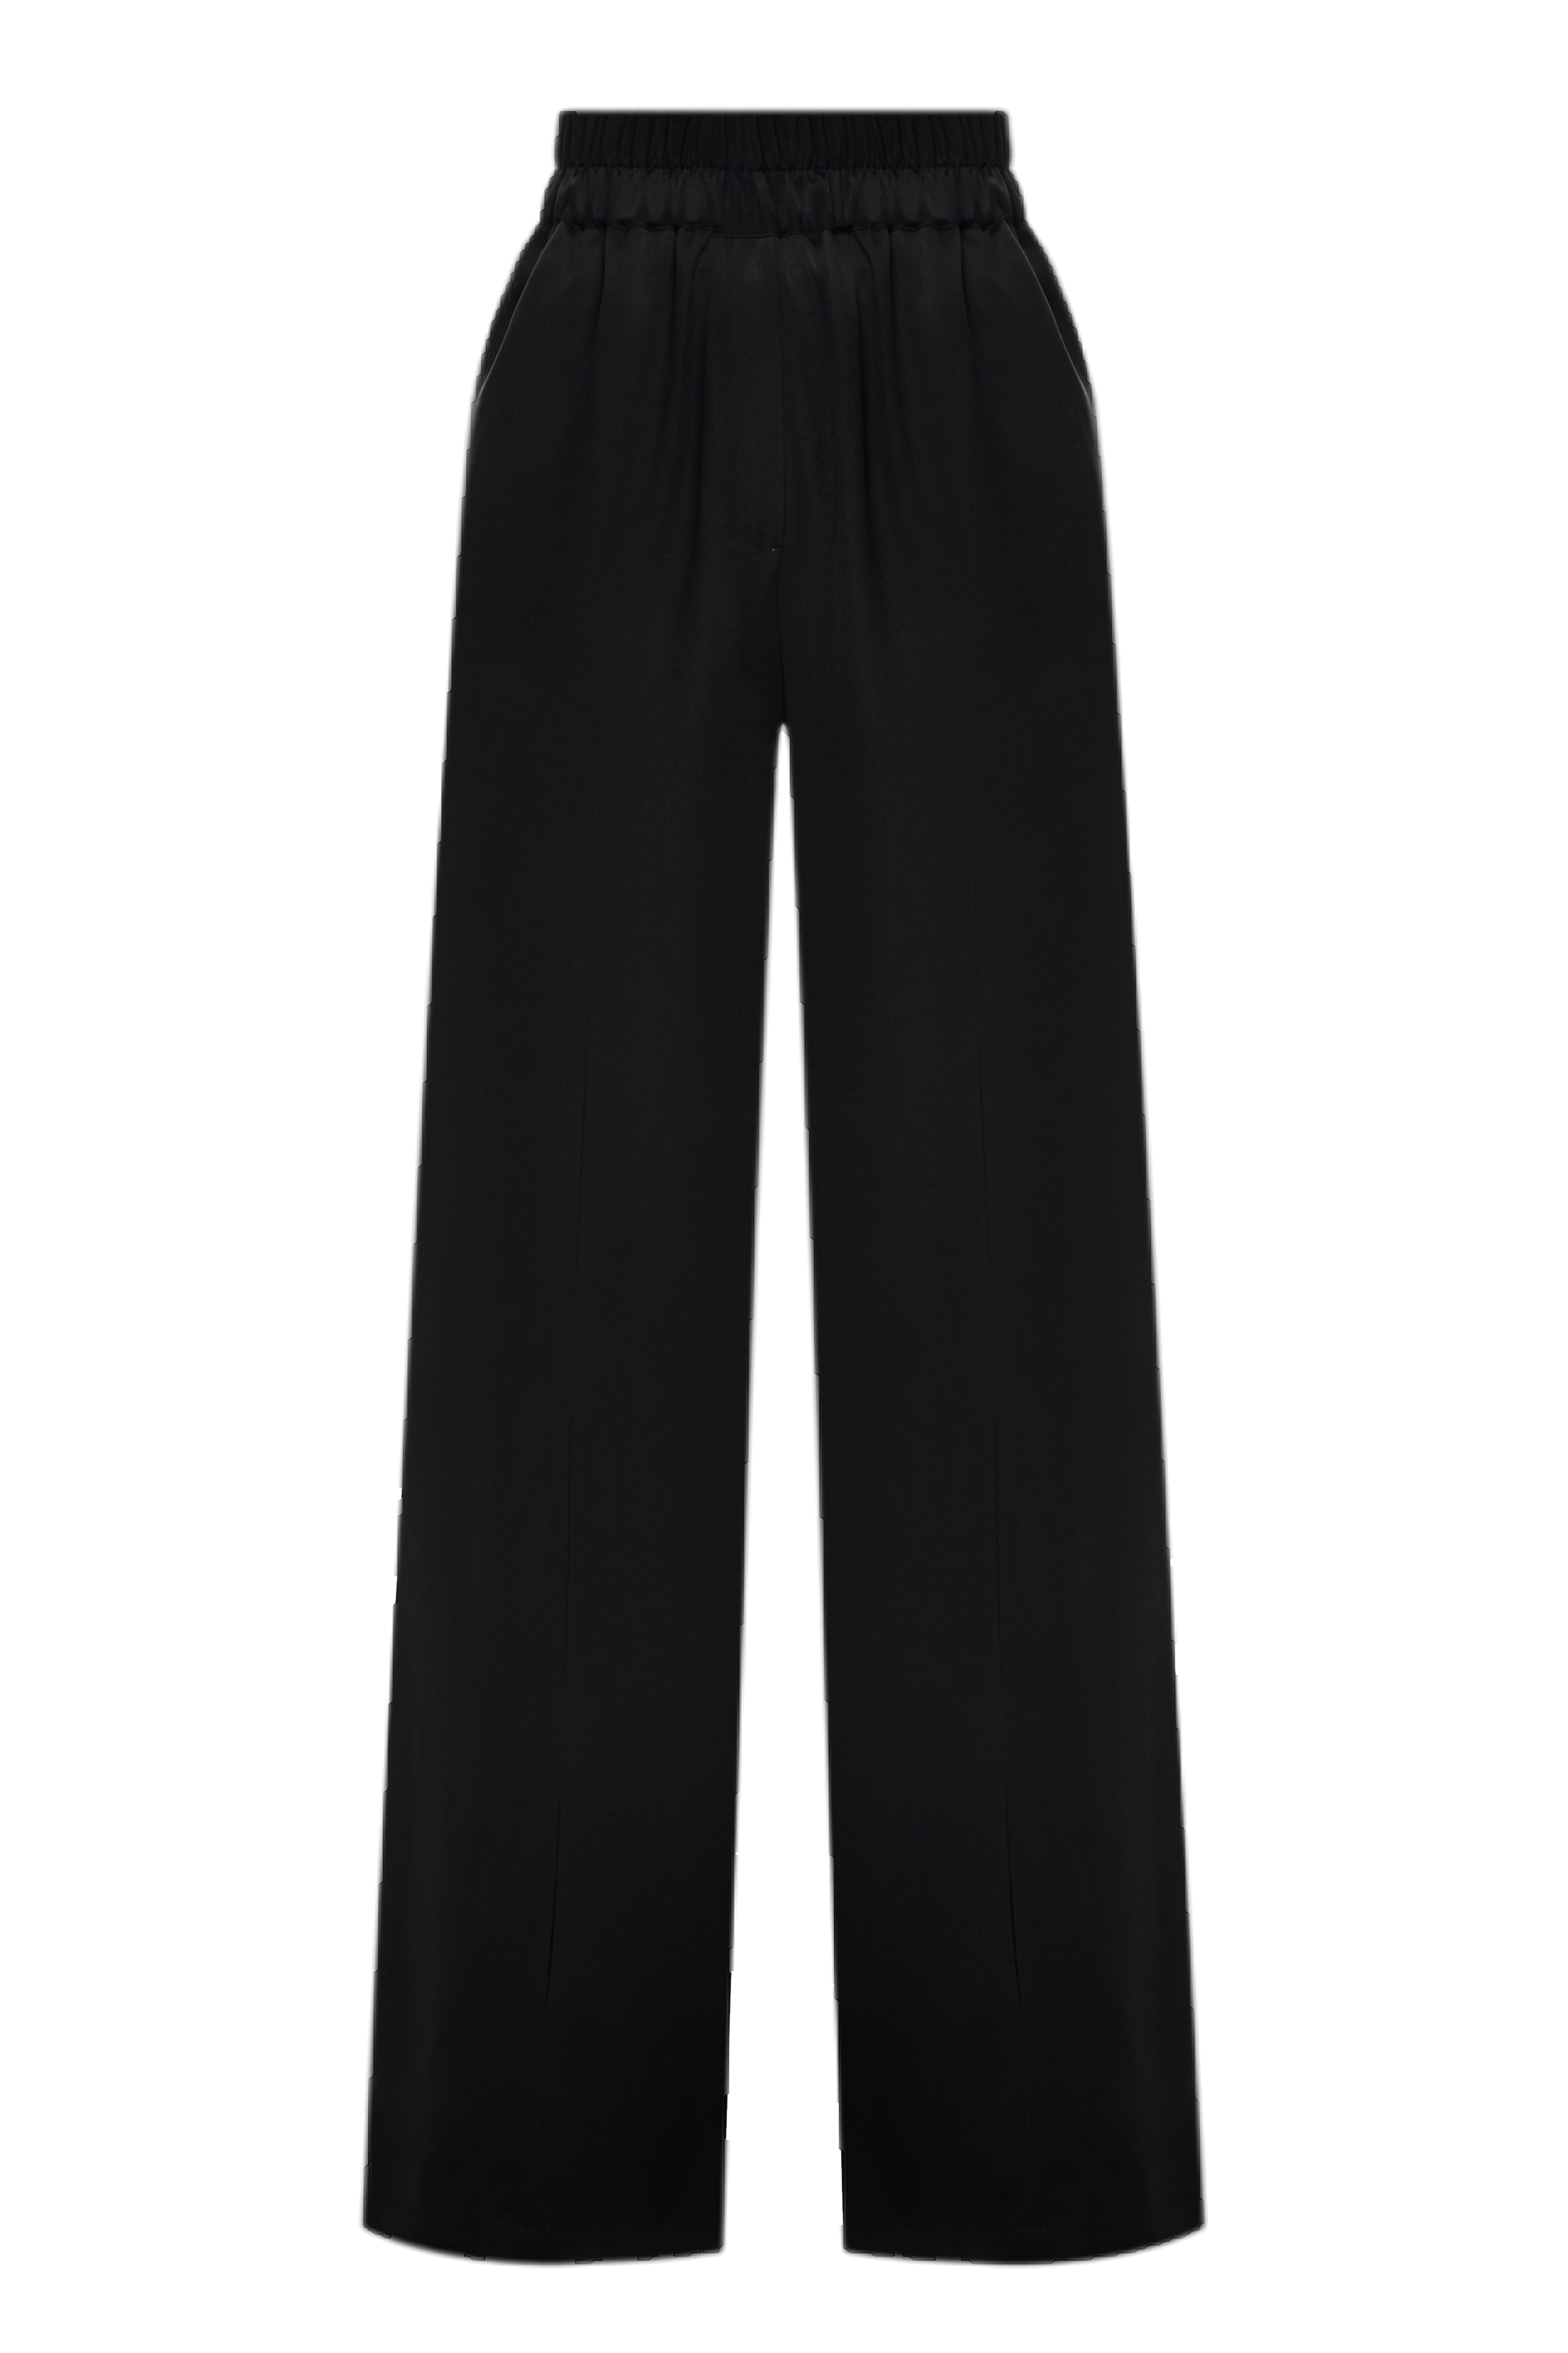 Malva Florea Pants With An Elastic Band With Slits At The Seams In Black